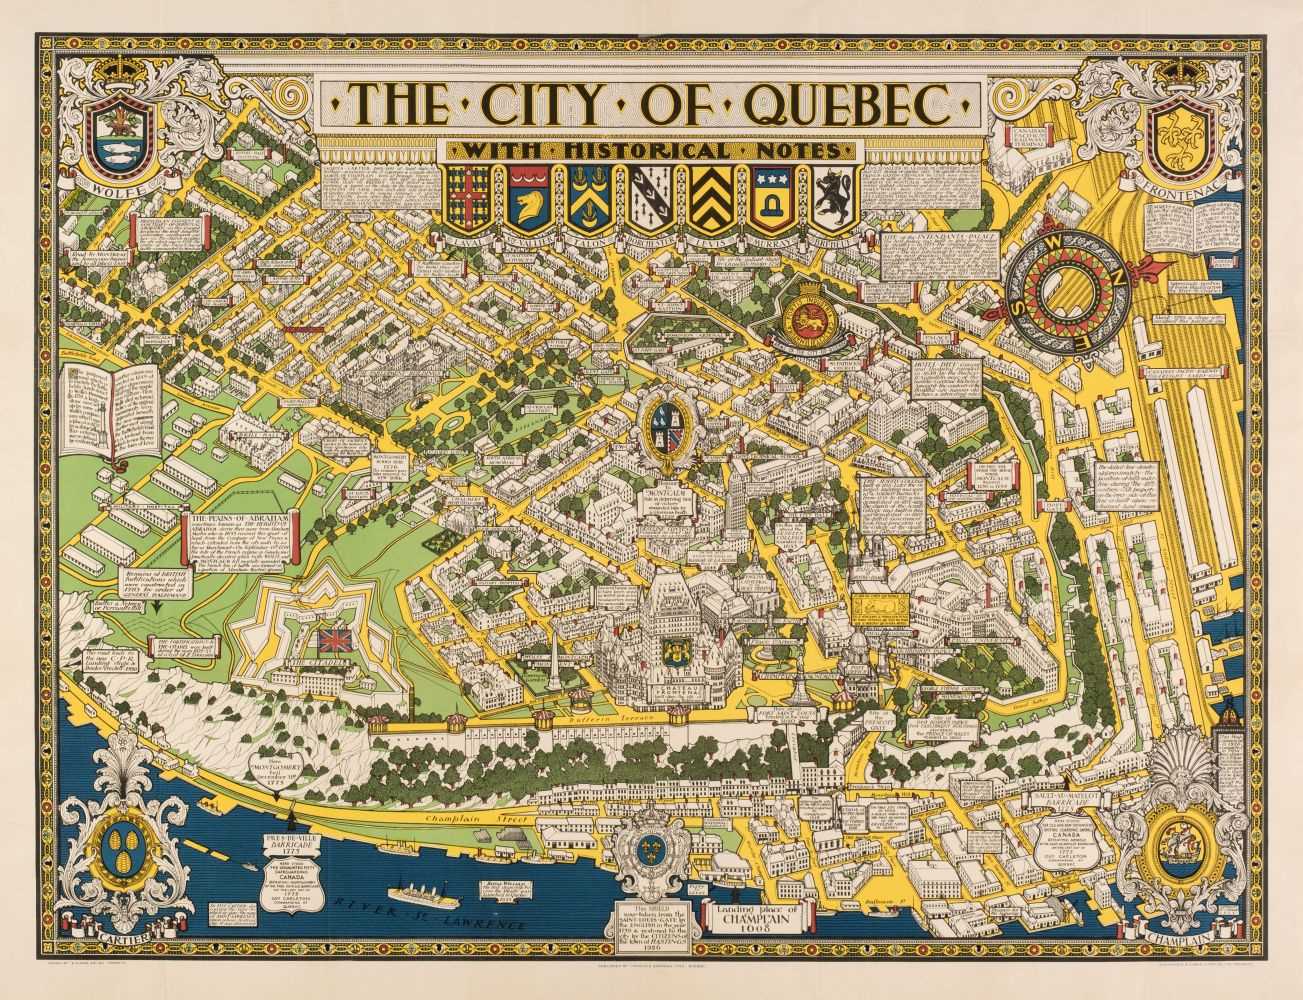 Lot 200 - Quebec. Maw (S. H.), The City of Quebec with historical notes, Alexander & Cable, Toronto, 1932